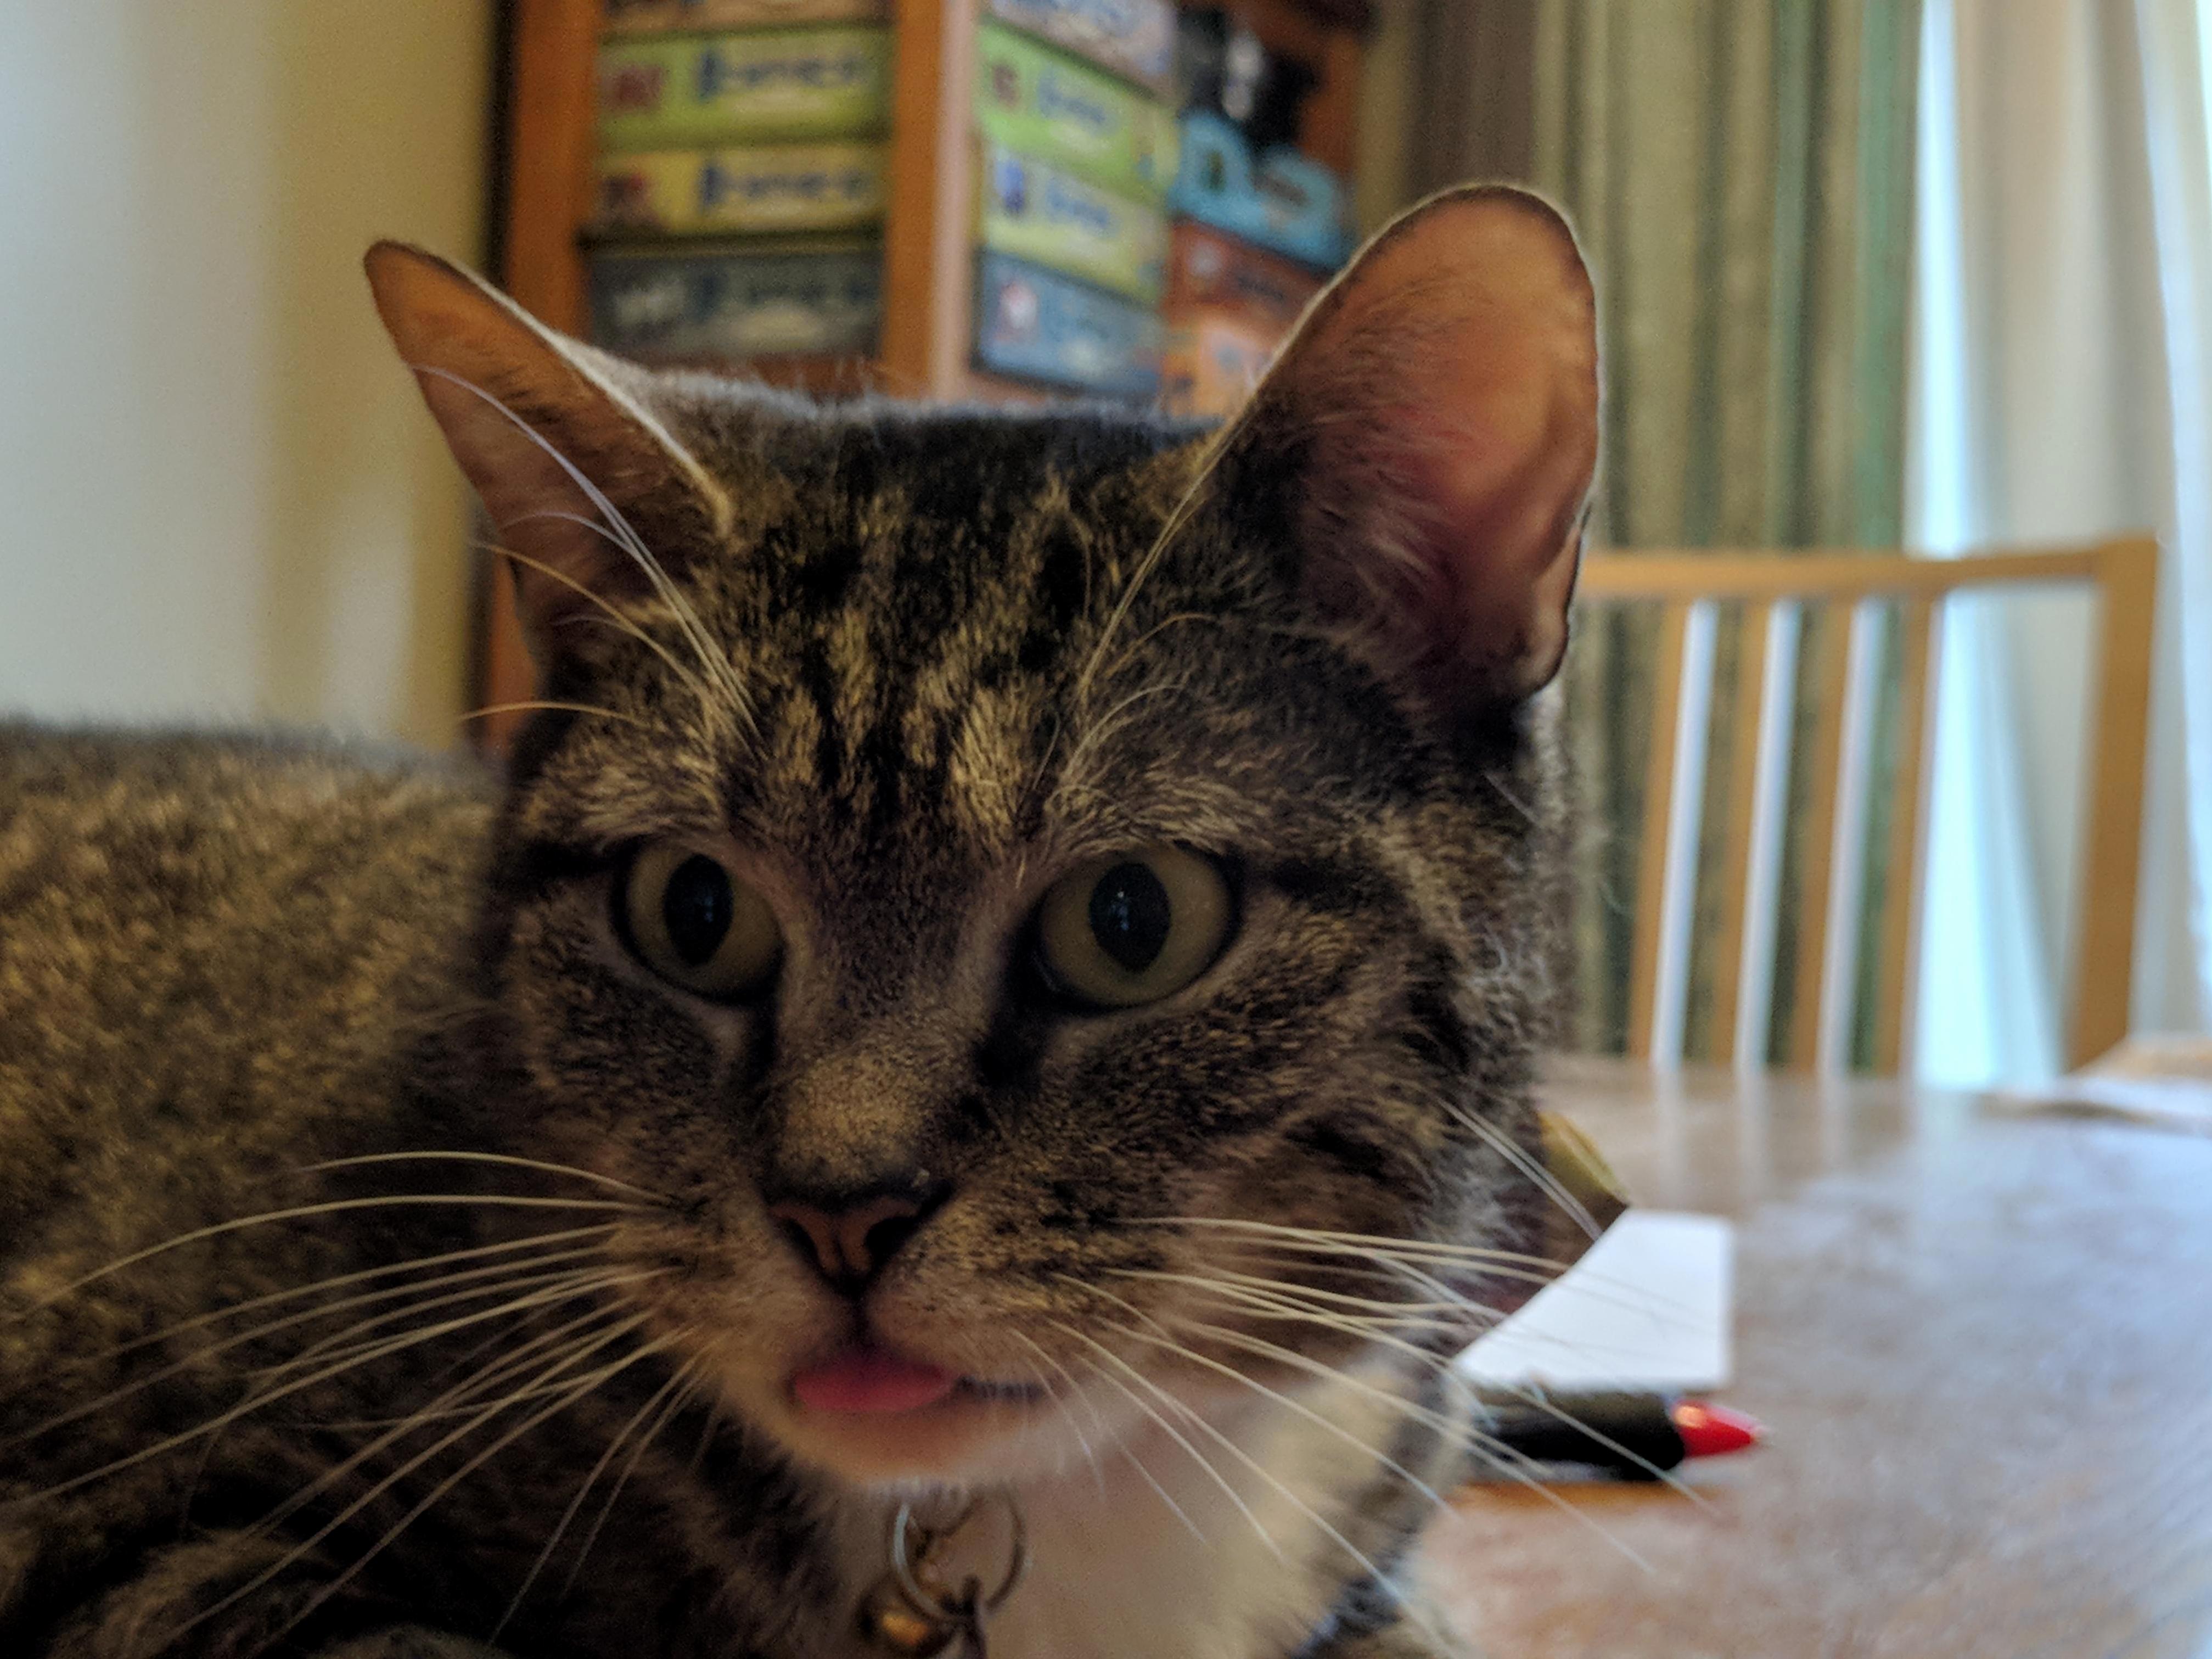 Chillin and blepin